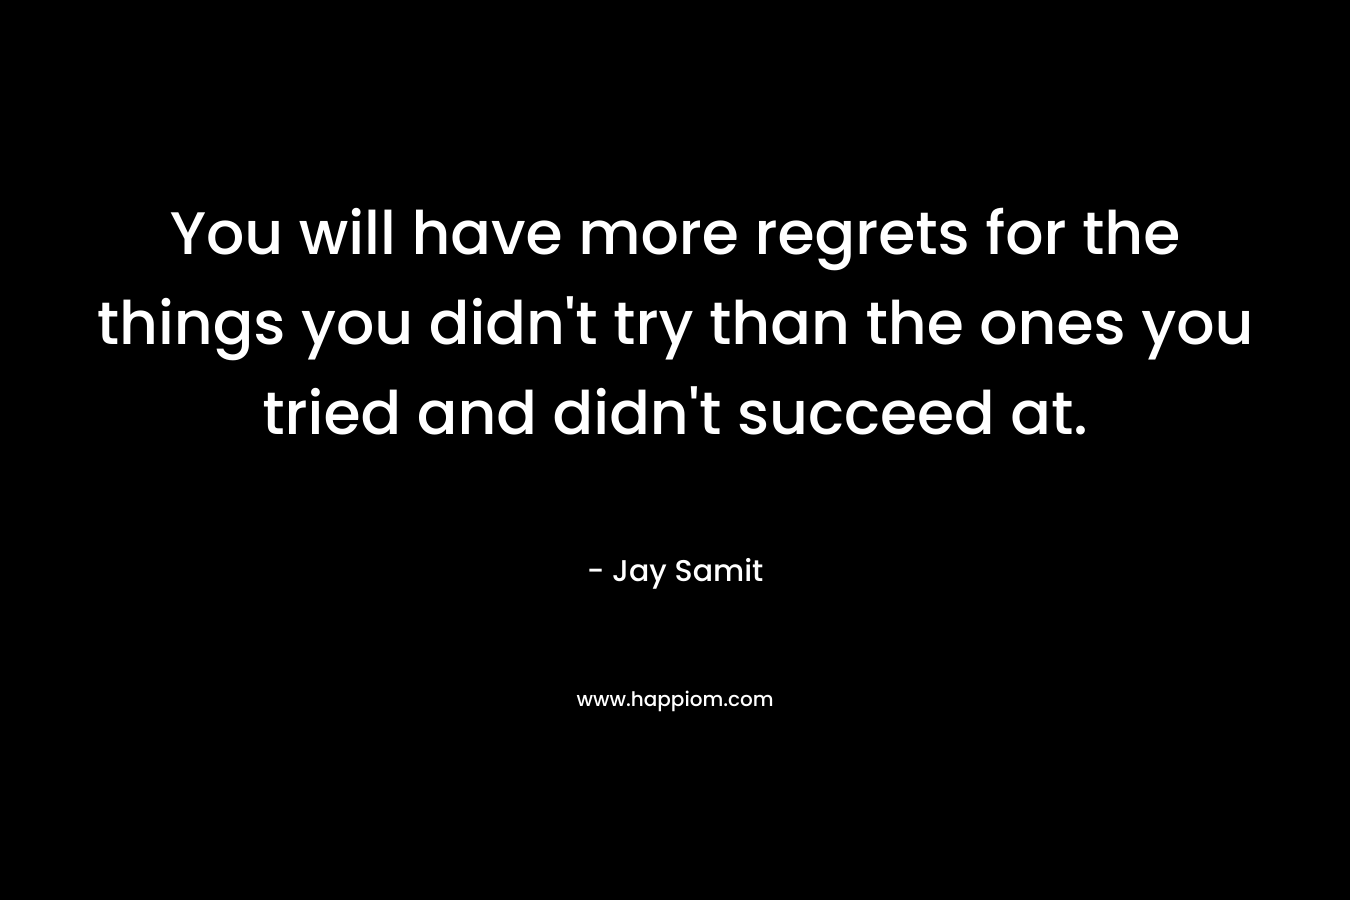 You will have more regrets for the things you didn't try than the ones you tried and didn't succeed at.